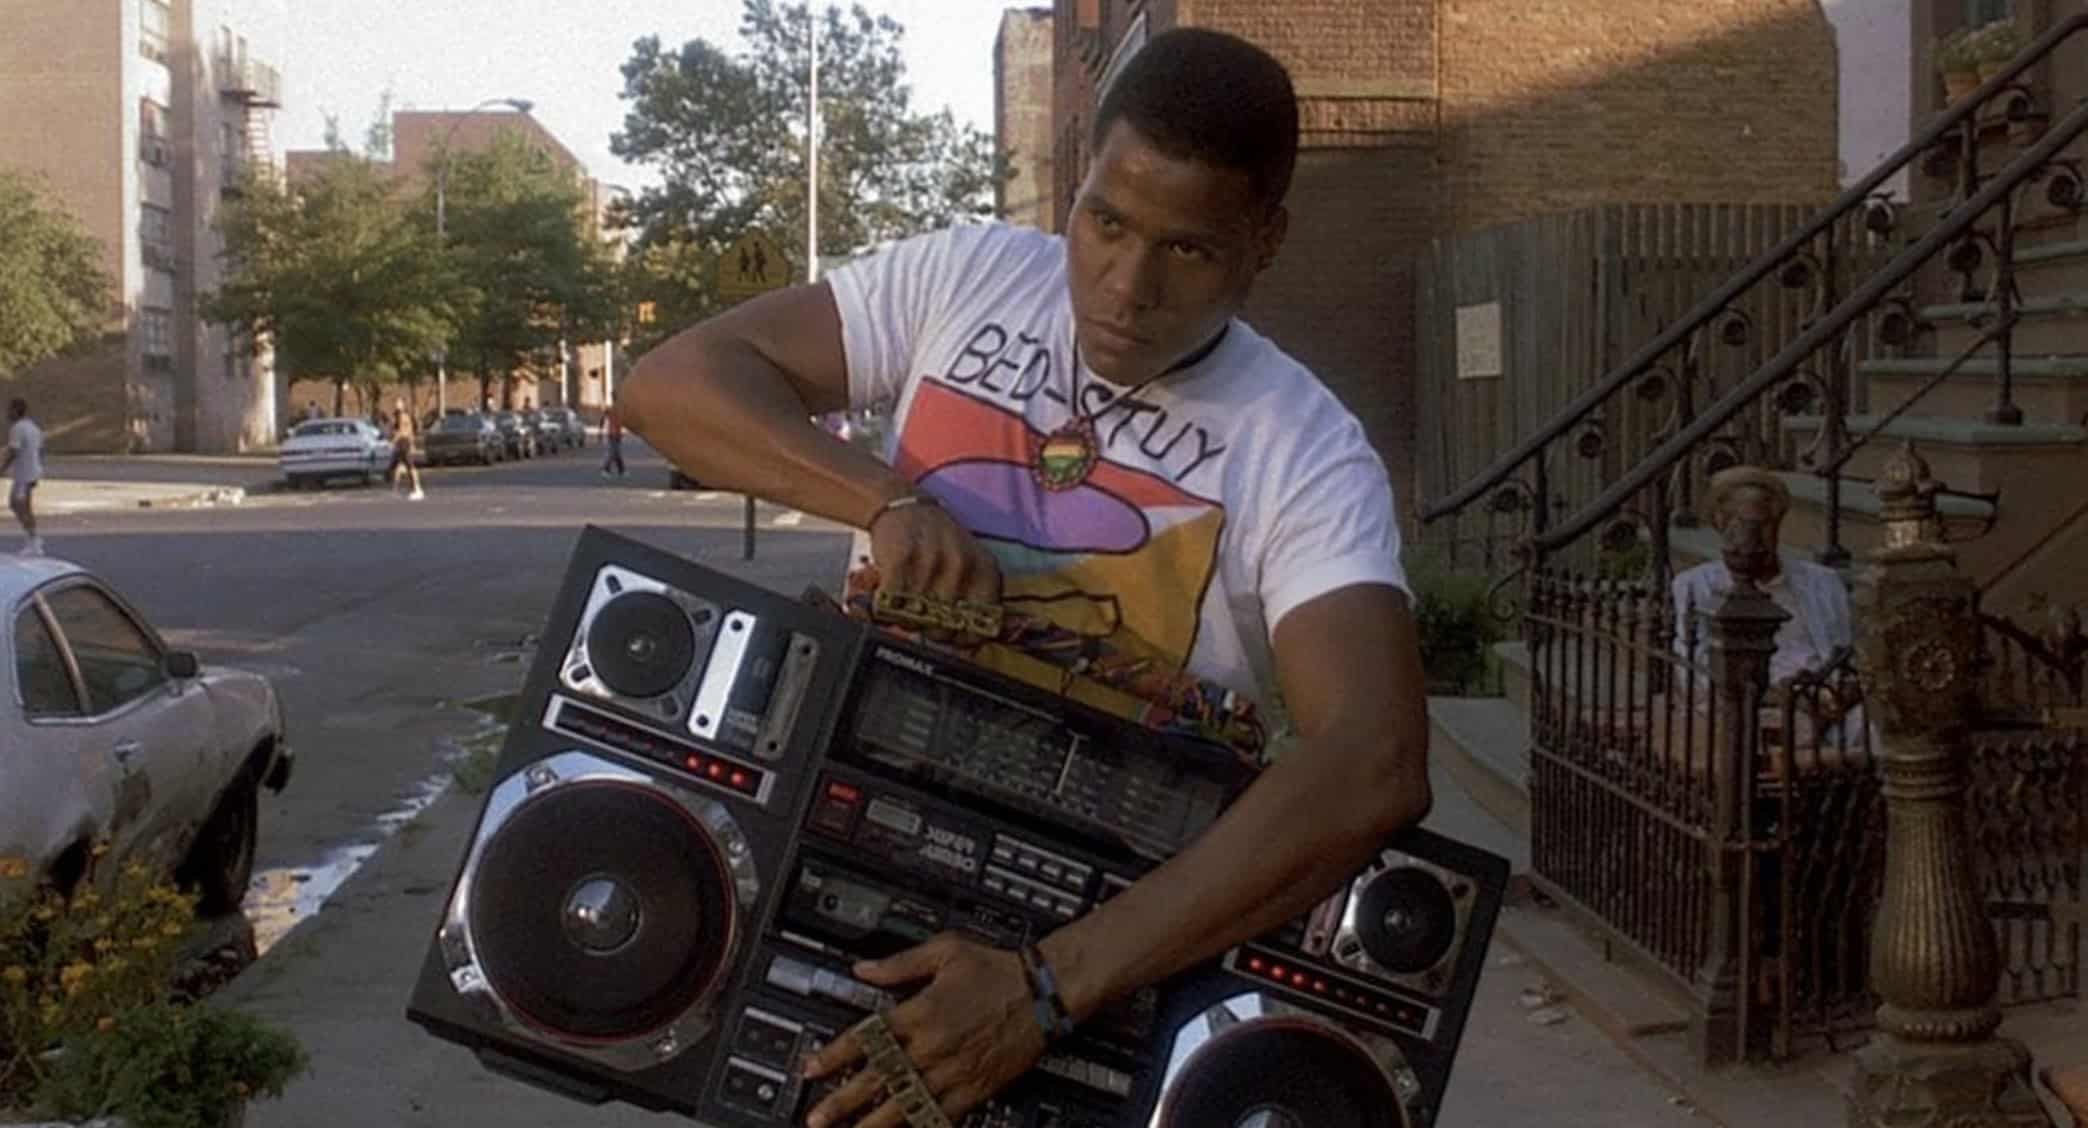 <p>Another one of the greatest speeches in movie history comes at the start of Spike Lee's chaotic, heartbreaking meditation on racial relations, "Do the Right Thing." It's a blistering hot summer in New York City, and everyone is at each other's throats. A small conflict at a pizza parlor, spirals out of control, leading to a tense, violent, and tragic confrontation between blacks and whites.</p> <p>The speech at the film's start delivered by the neighborhood character Radio Raheem, however, provides foreshadowing to the conflicts that lay ahead. Donning two chunky brass knuckles saying LOVE and HATE, Raheem details the eternal struggle between the two forces. Furthermore, using simple terms, Raheem illustrates the theme of the movie and the divisive conflict that sets the neighborhood ablaze. As Raheem says, "Let me tell you the story of Right Hand, Left Hand. It's a tale of good and evil. Hate: It was with this hand that Cain iced his brother. Love: These five fingers, they go straight to the soul of man. The right hand: The hand of love. The story of life is this: Static."</p>